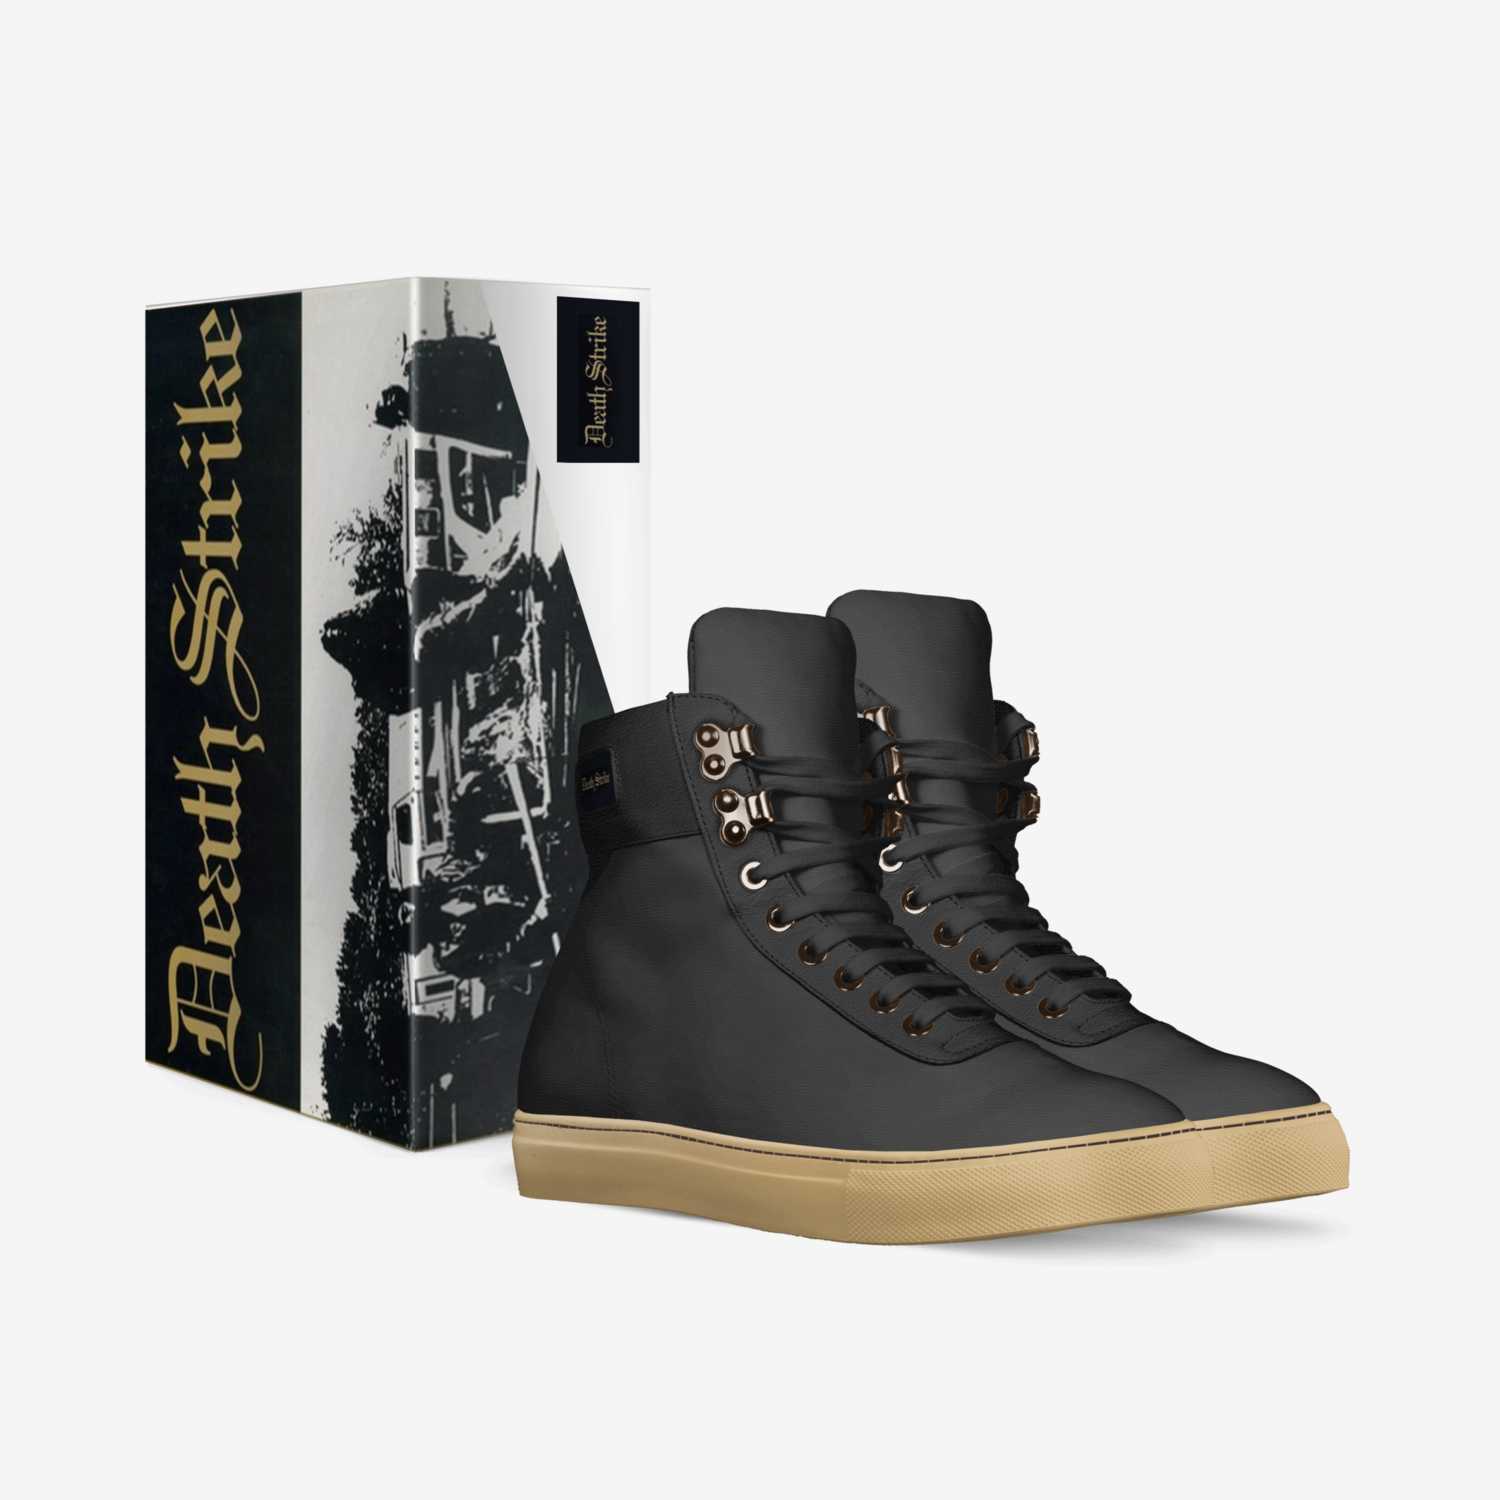 Death Strike custom made in Italy shoes by Your Band Footwear | Box view